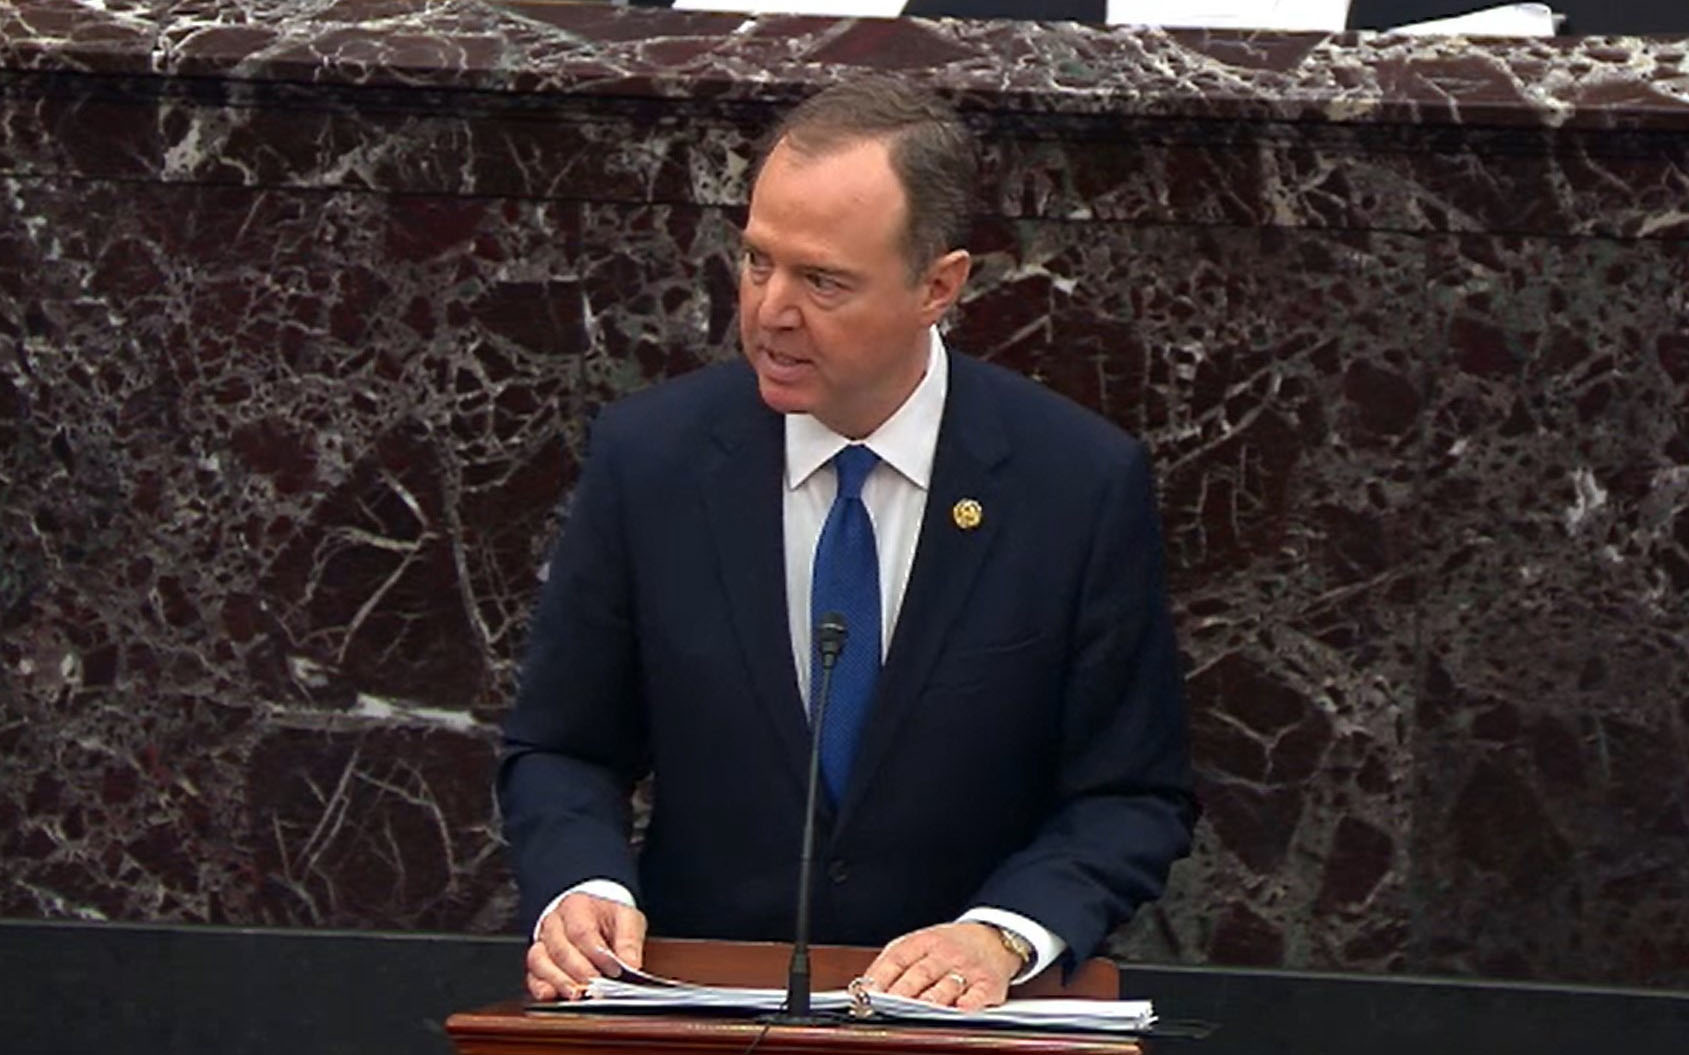 PHOTO: In this screengrab taken from a Senate Television webcast, House manager Rep. Adam Schiff speaks during impeachment proceedings against U.S. President Donald Trump in the Senate at the U.S. Capitol on Feb. 3, 2020, in Washington, DC.